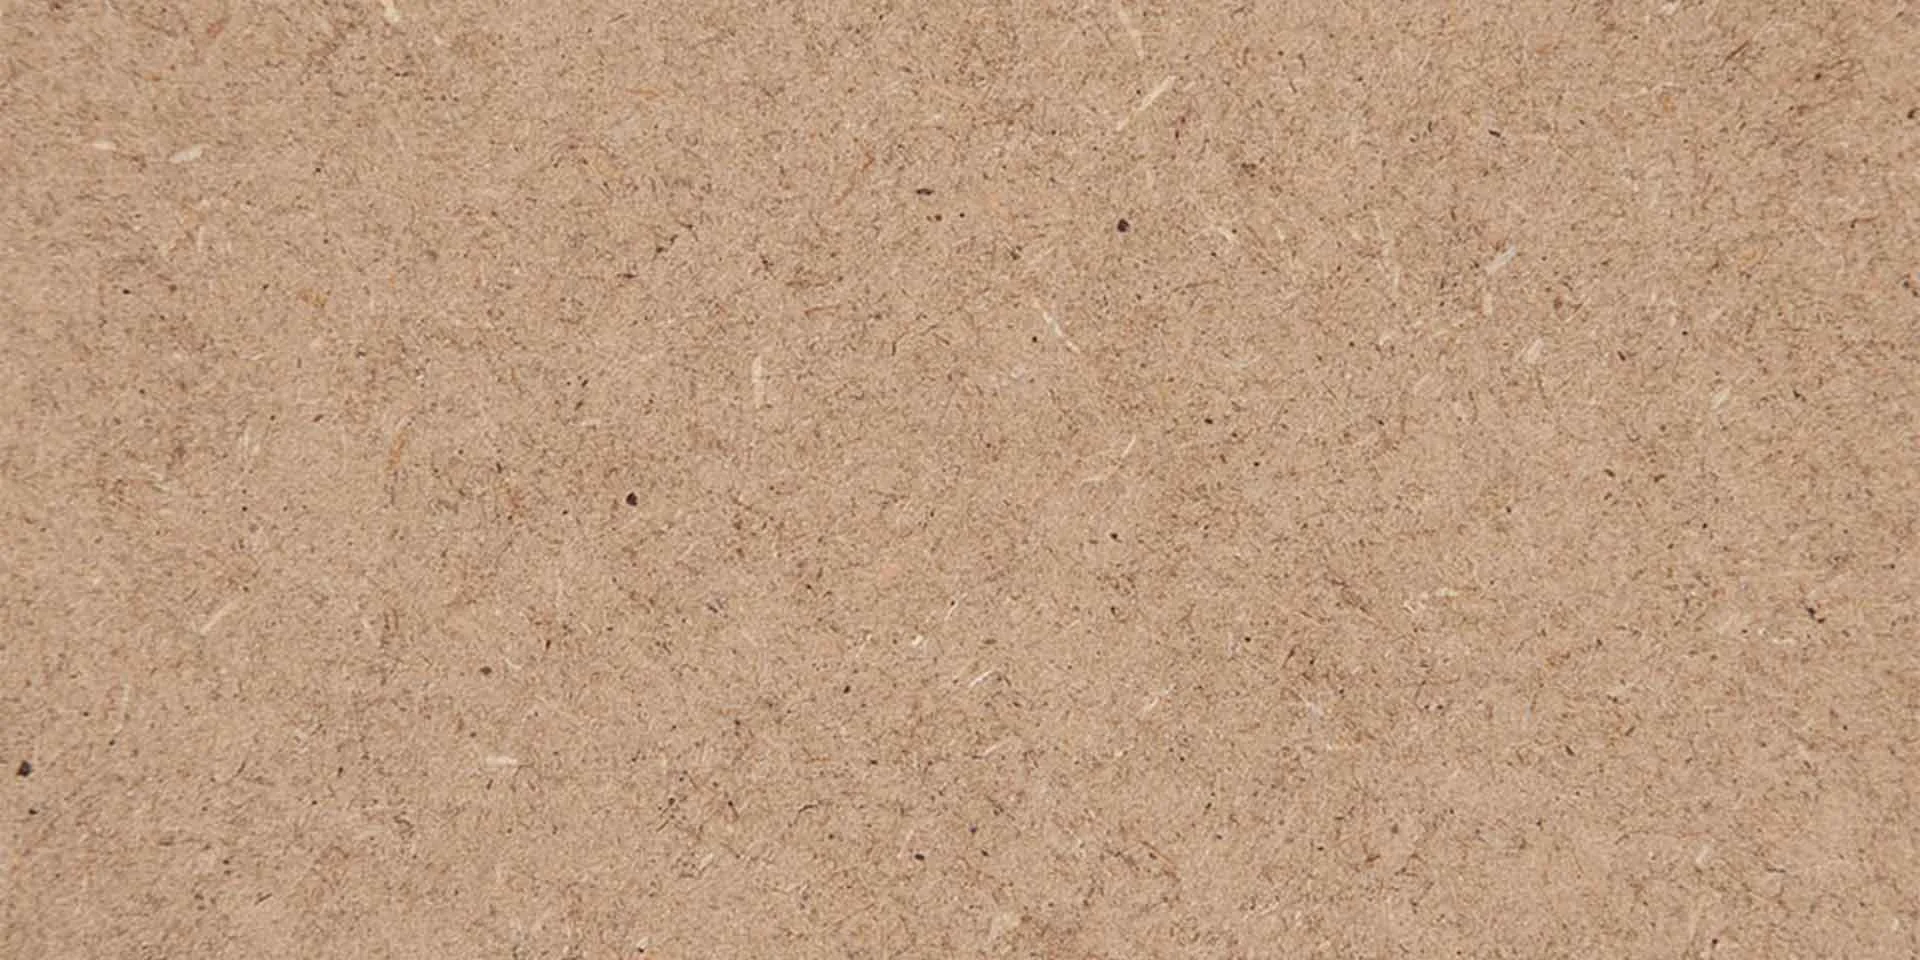 TSFC046 in MDF natural